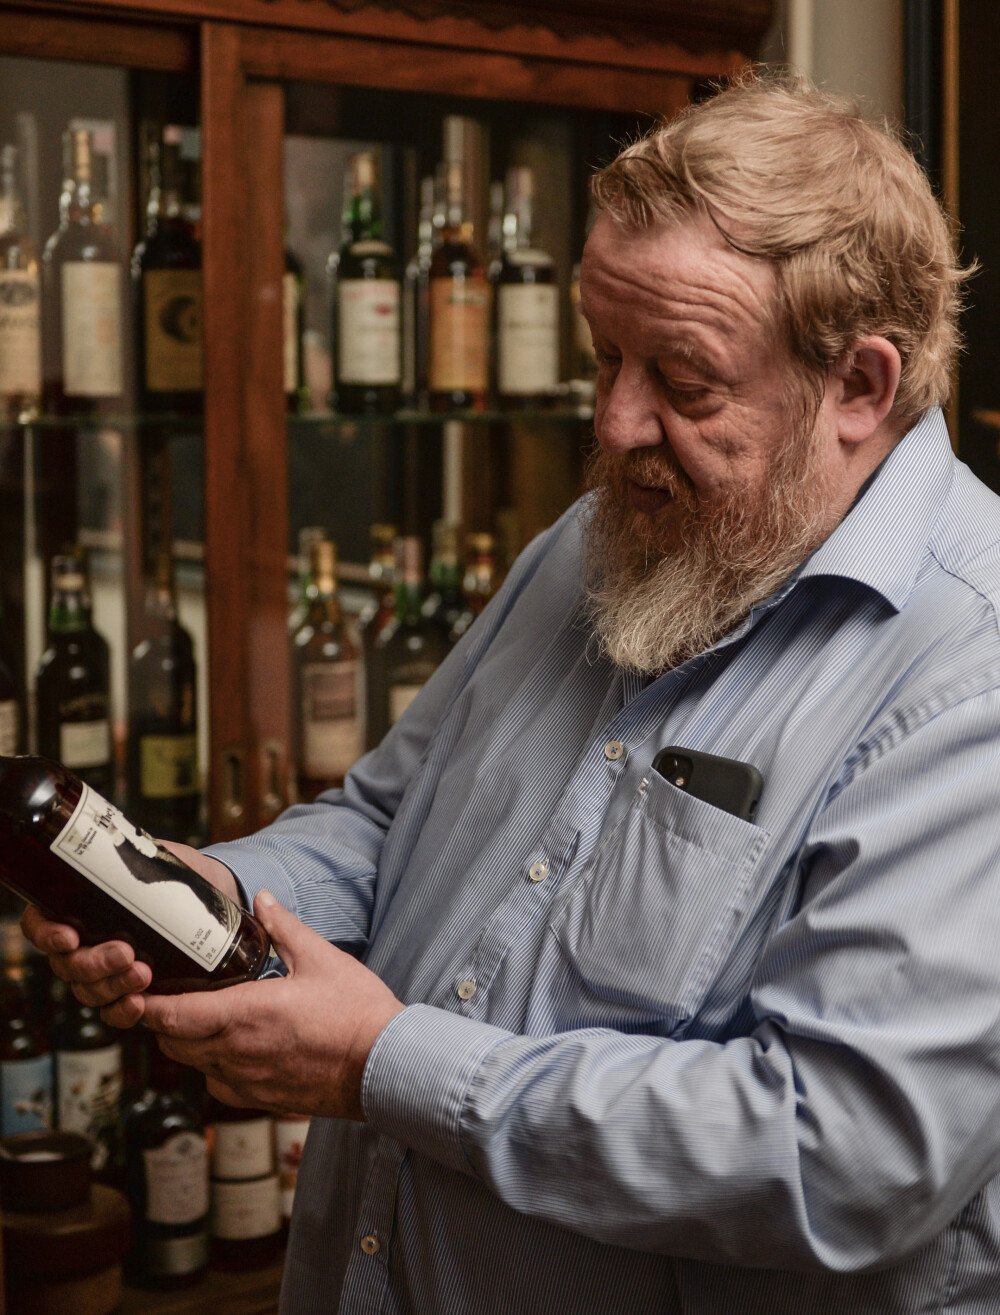 Talking Whisky With Michiel Wigman